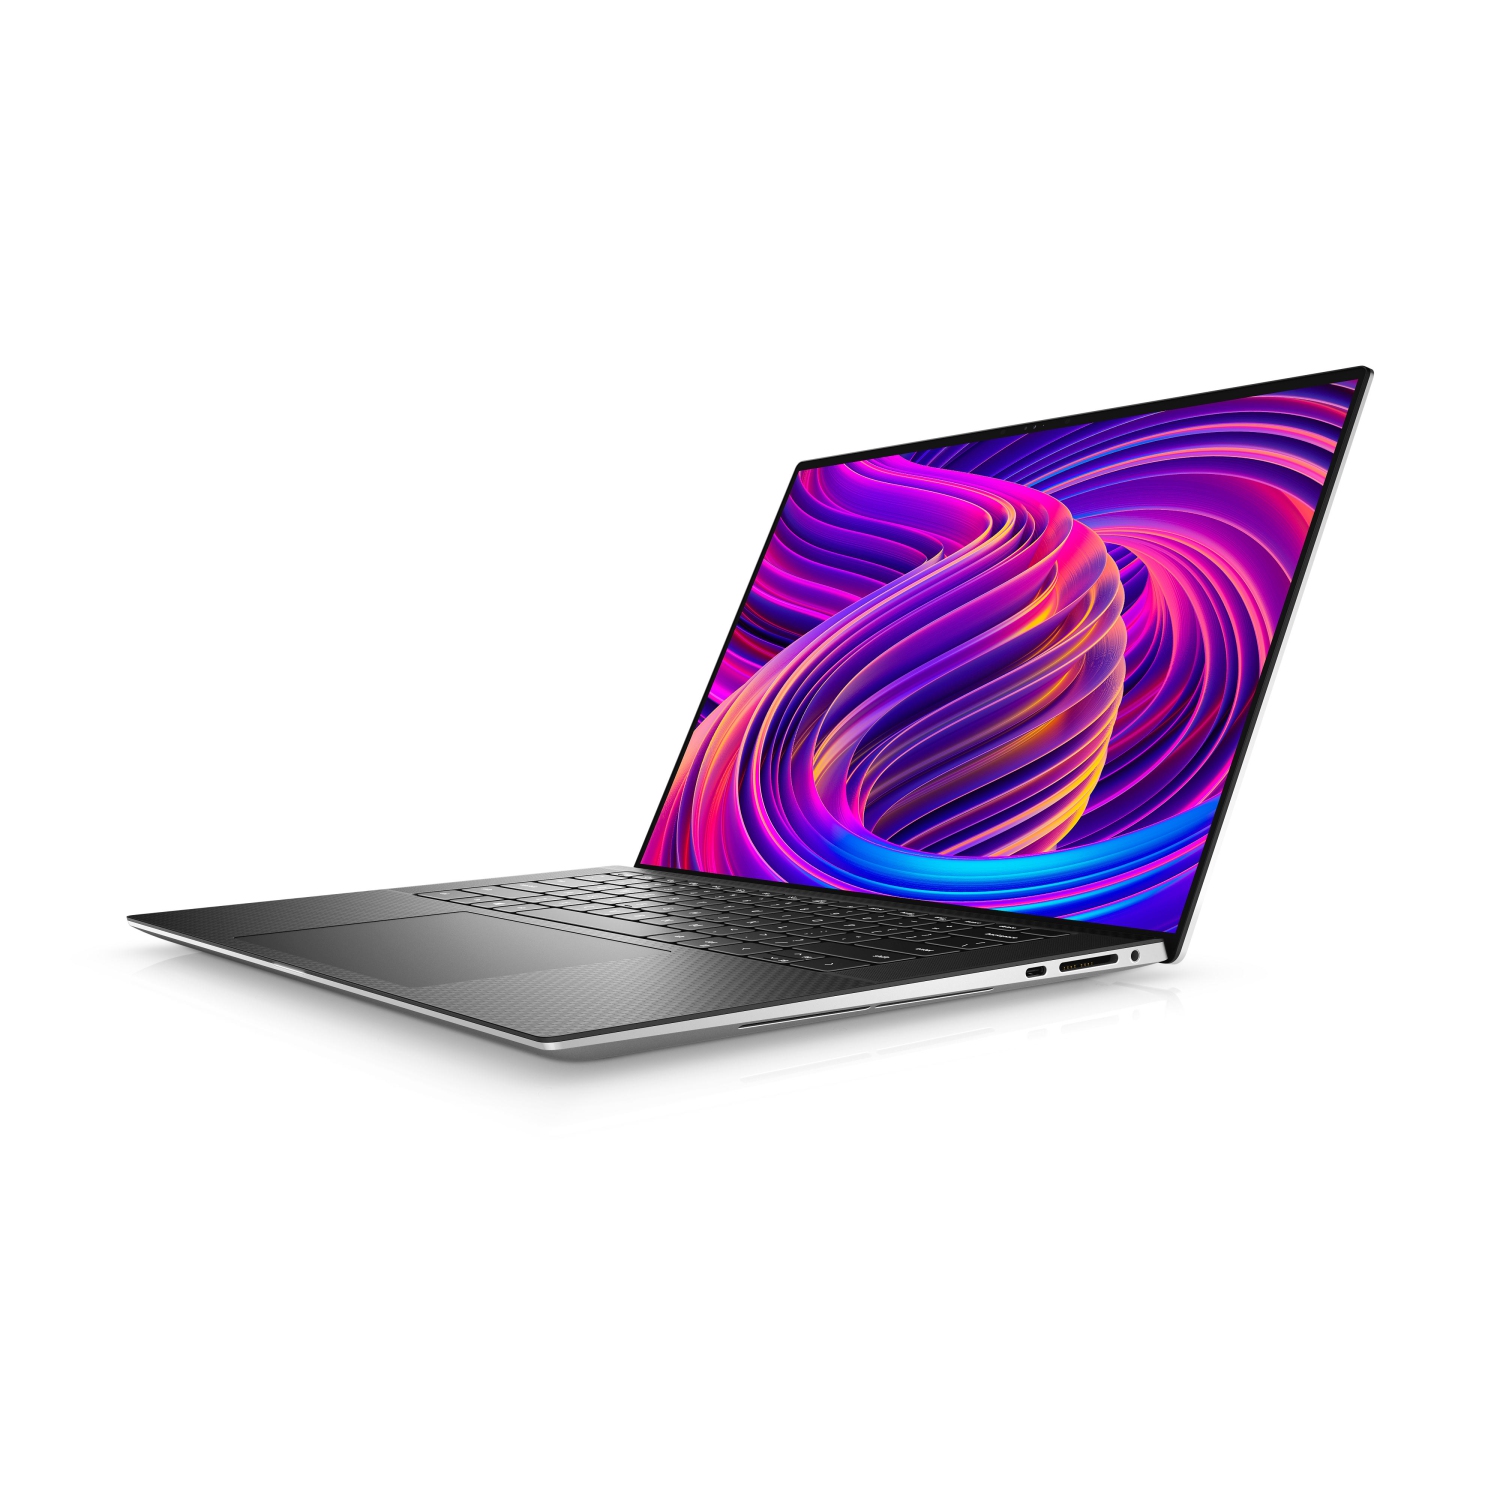 Refurbished (Excellent) - Dell XPS 15 9510 Laptop (2021) | 15.6" FHD+ | Core i9 - 512GB SSD - 64GB RAM - 3050 Ti | 8 Cores @ 4.9 GHz - 11th Gen CPU Certified Refurbished